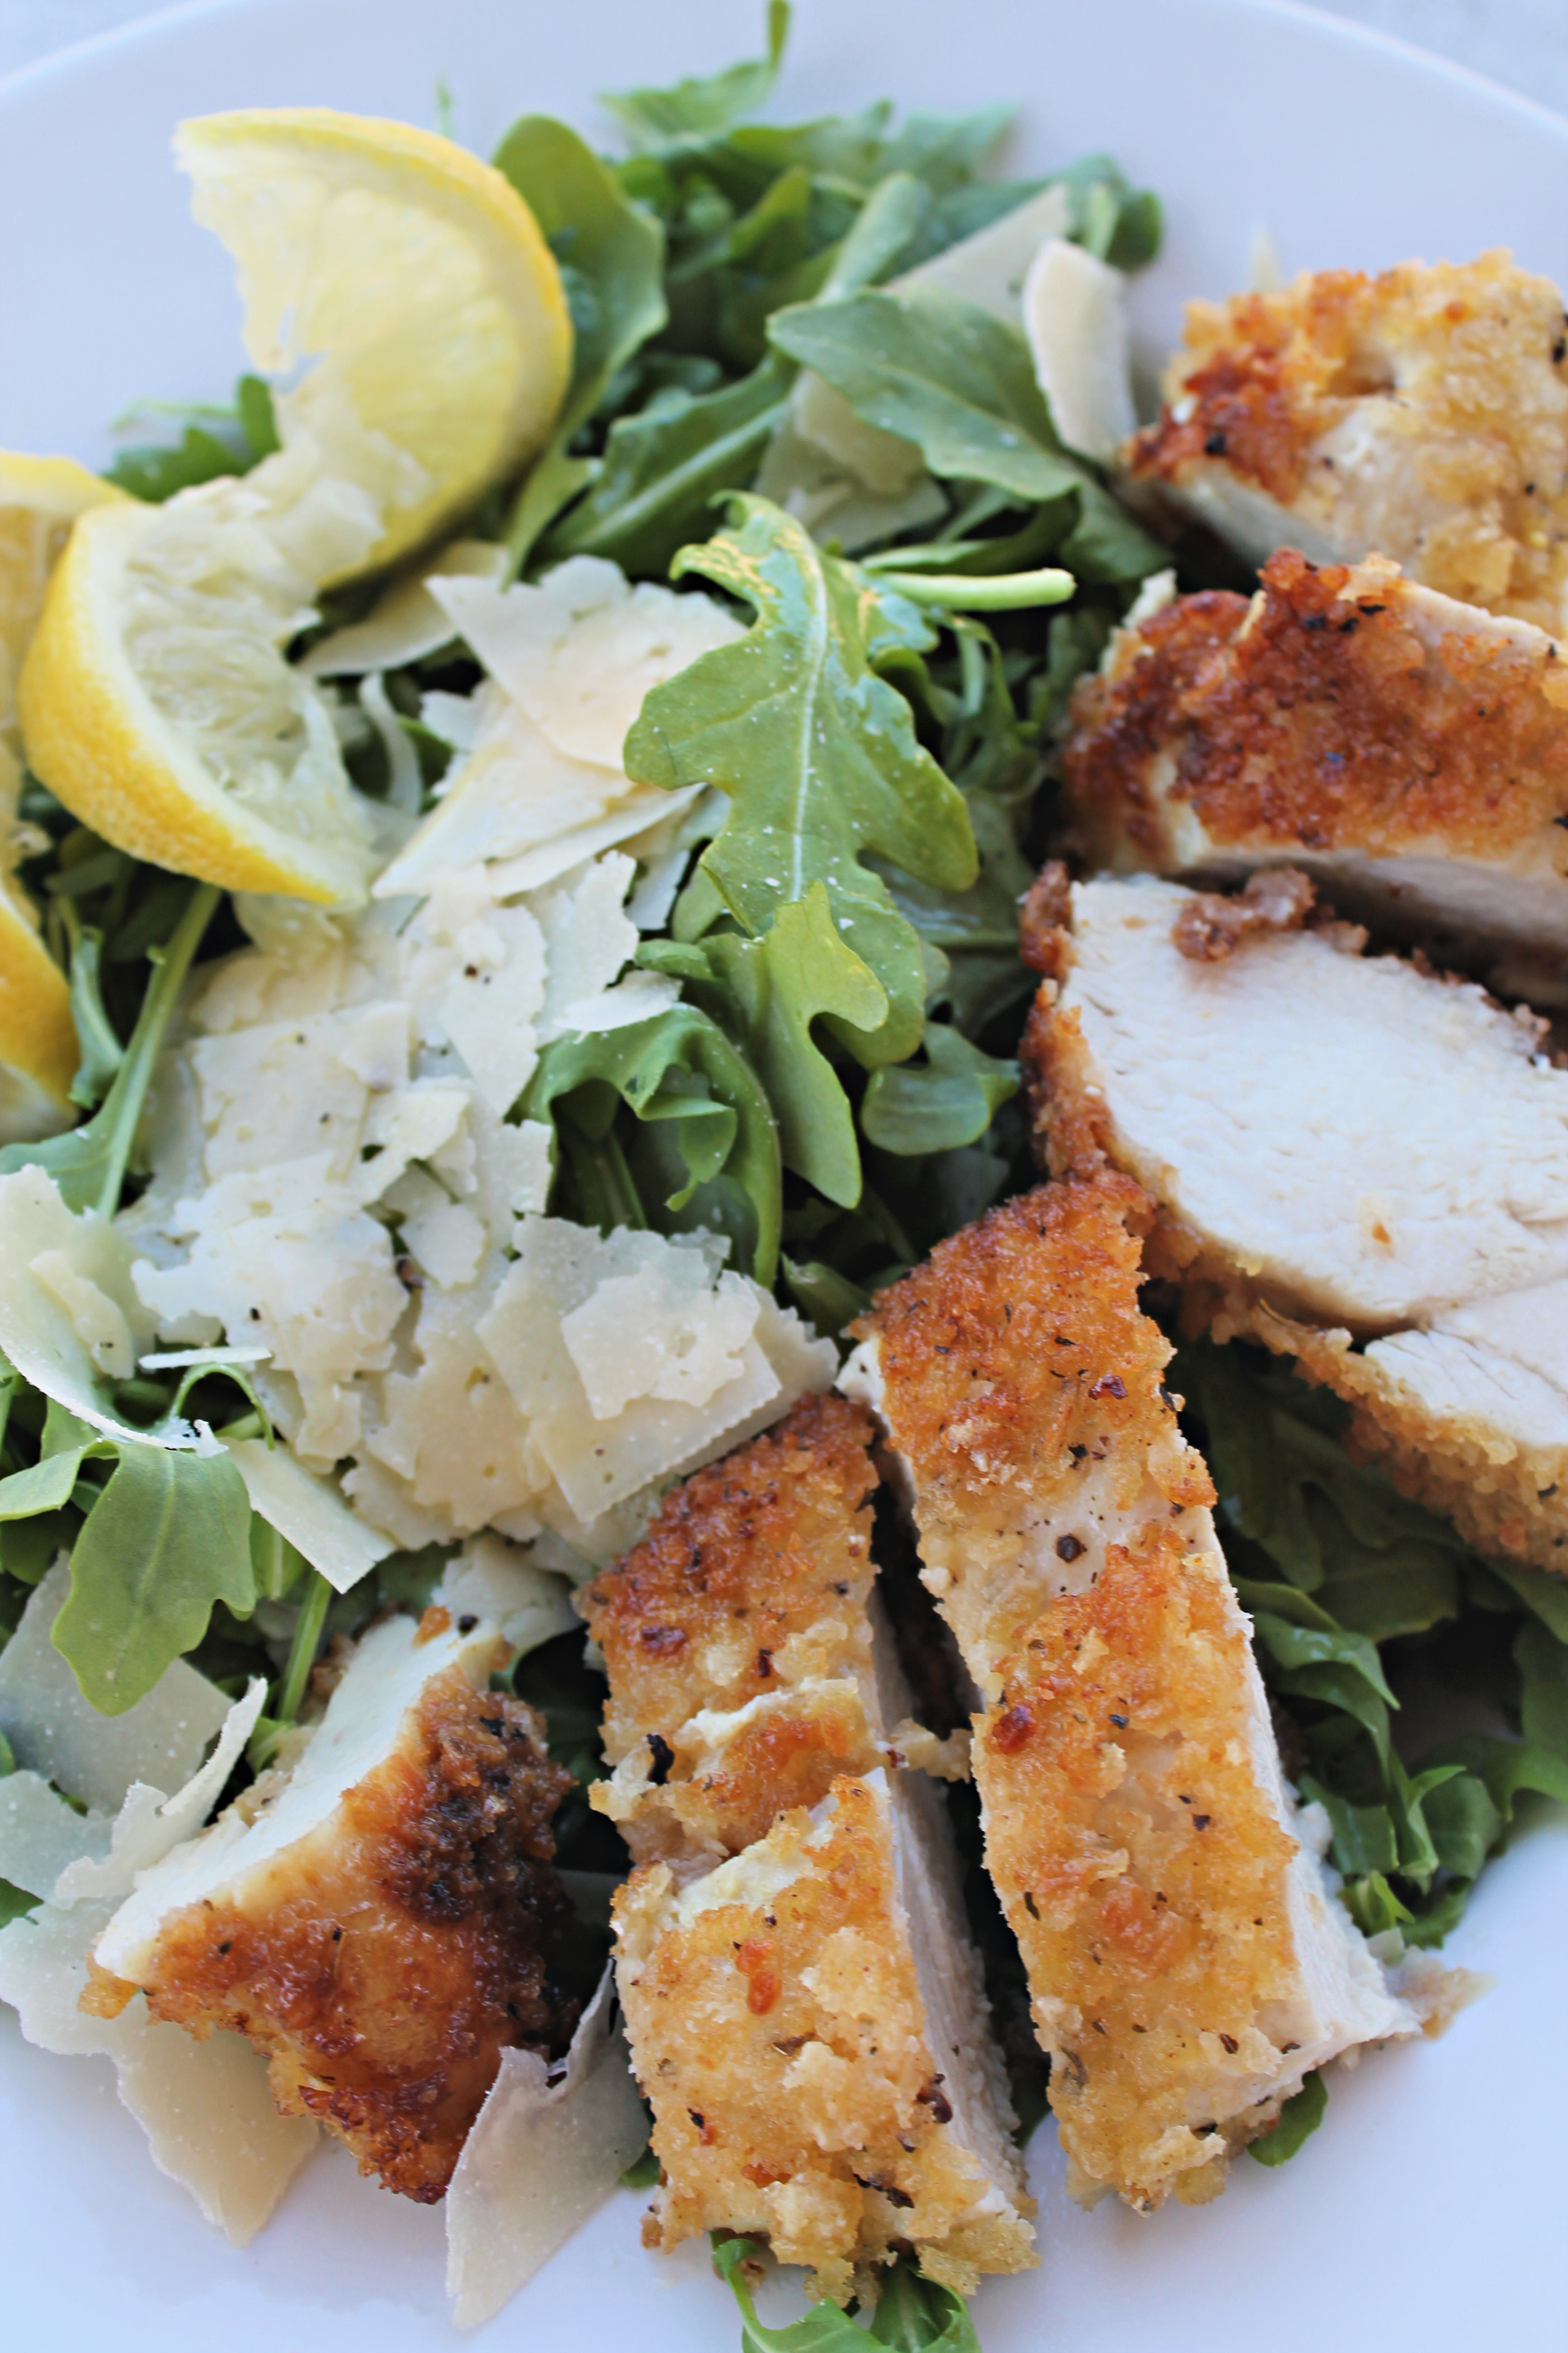 Panko Chicken Breast With Arugula And Provolne : Parmesan Crusted Chicken With Arugula Salad Recipe Marcia Kiesel Food Wine